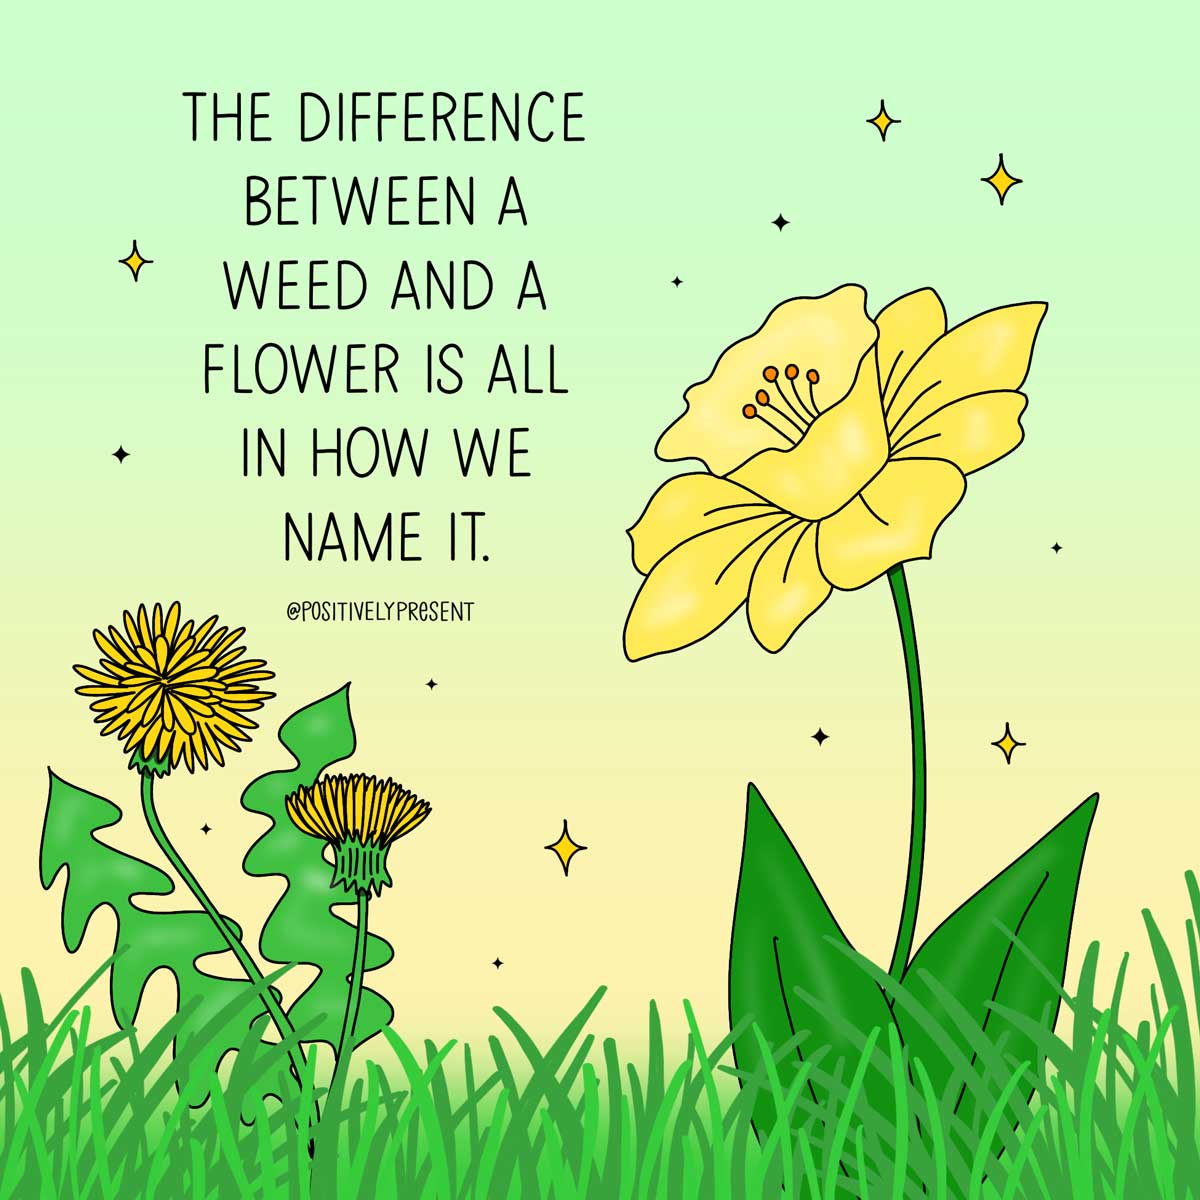 dandelion and daffodil art says difference between flower and weed is the name.